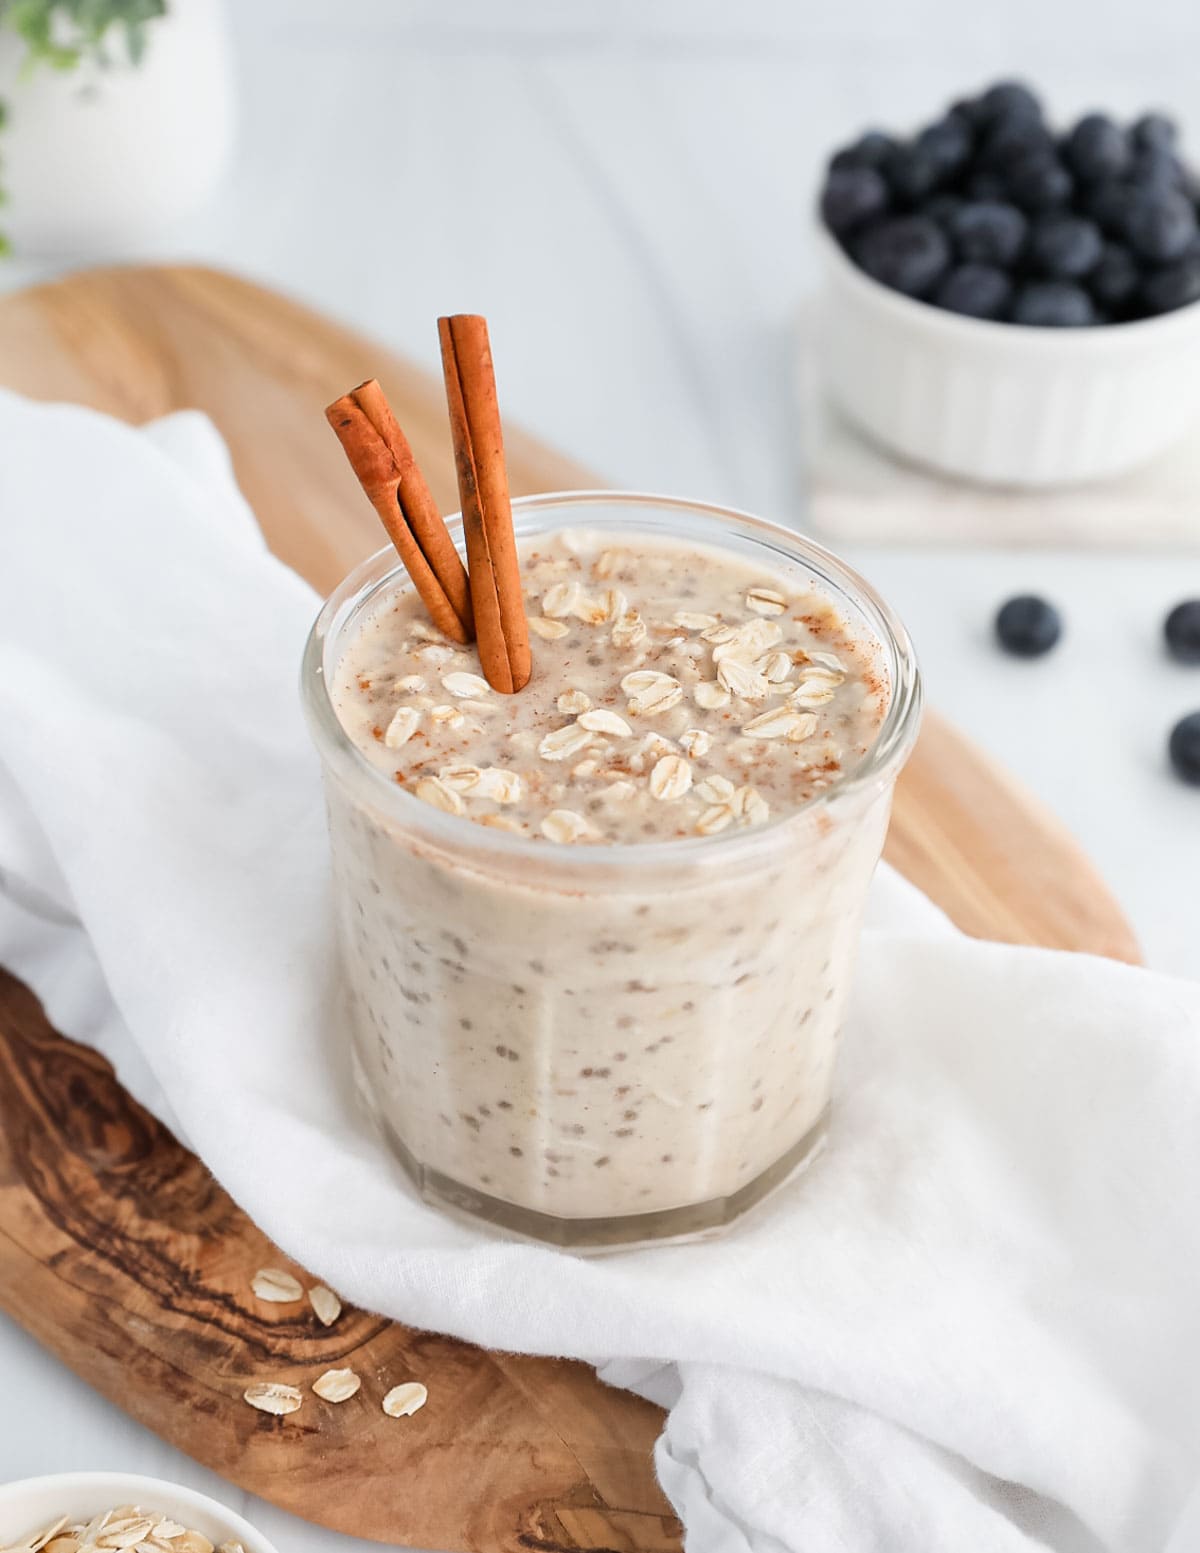 Overnight oats and cinnamon sticks in a jar.